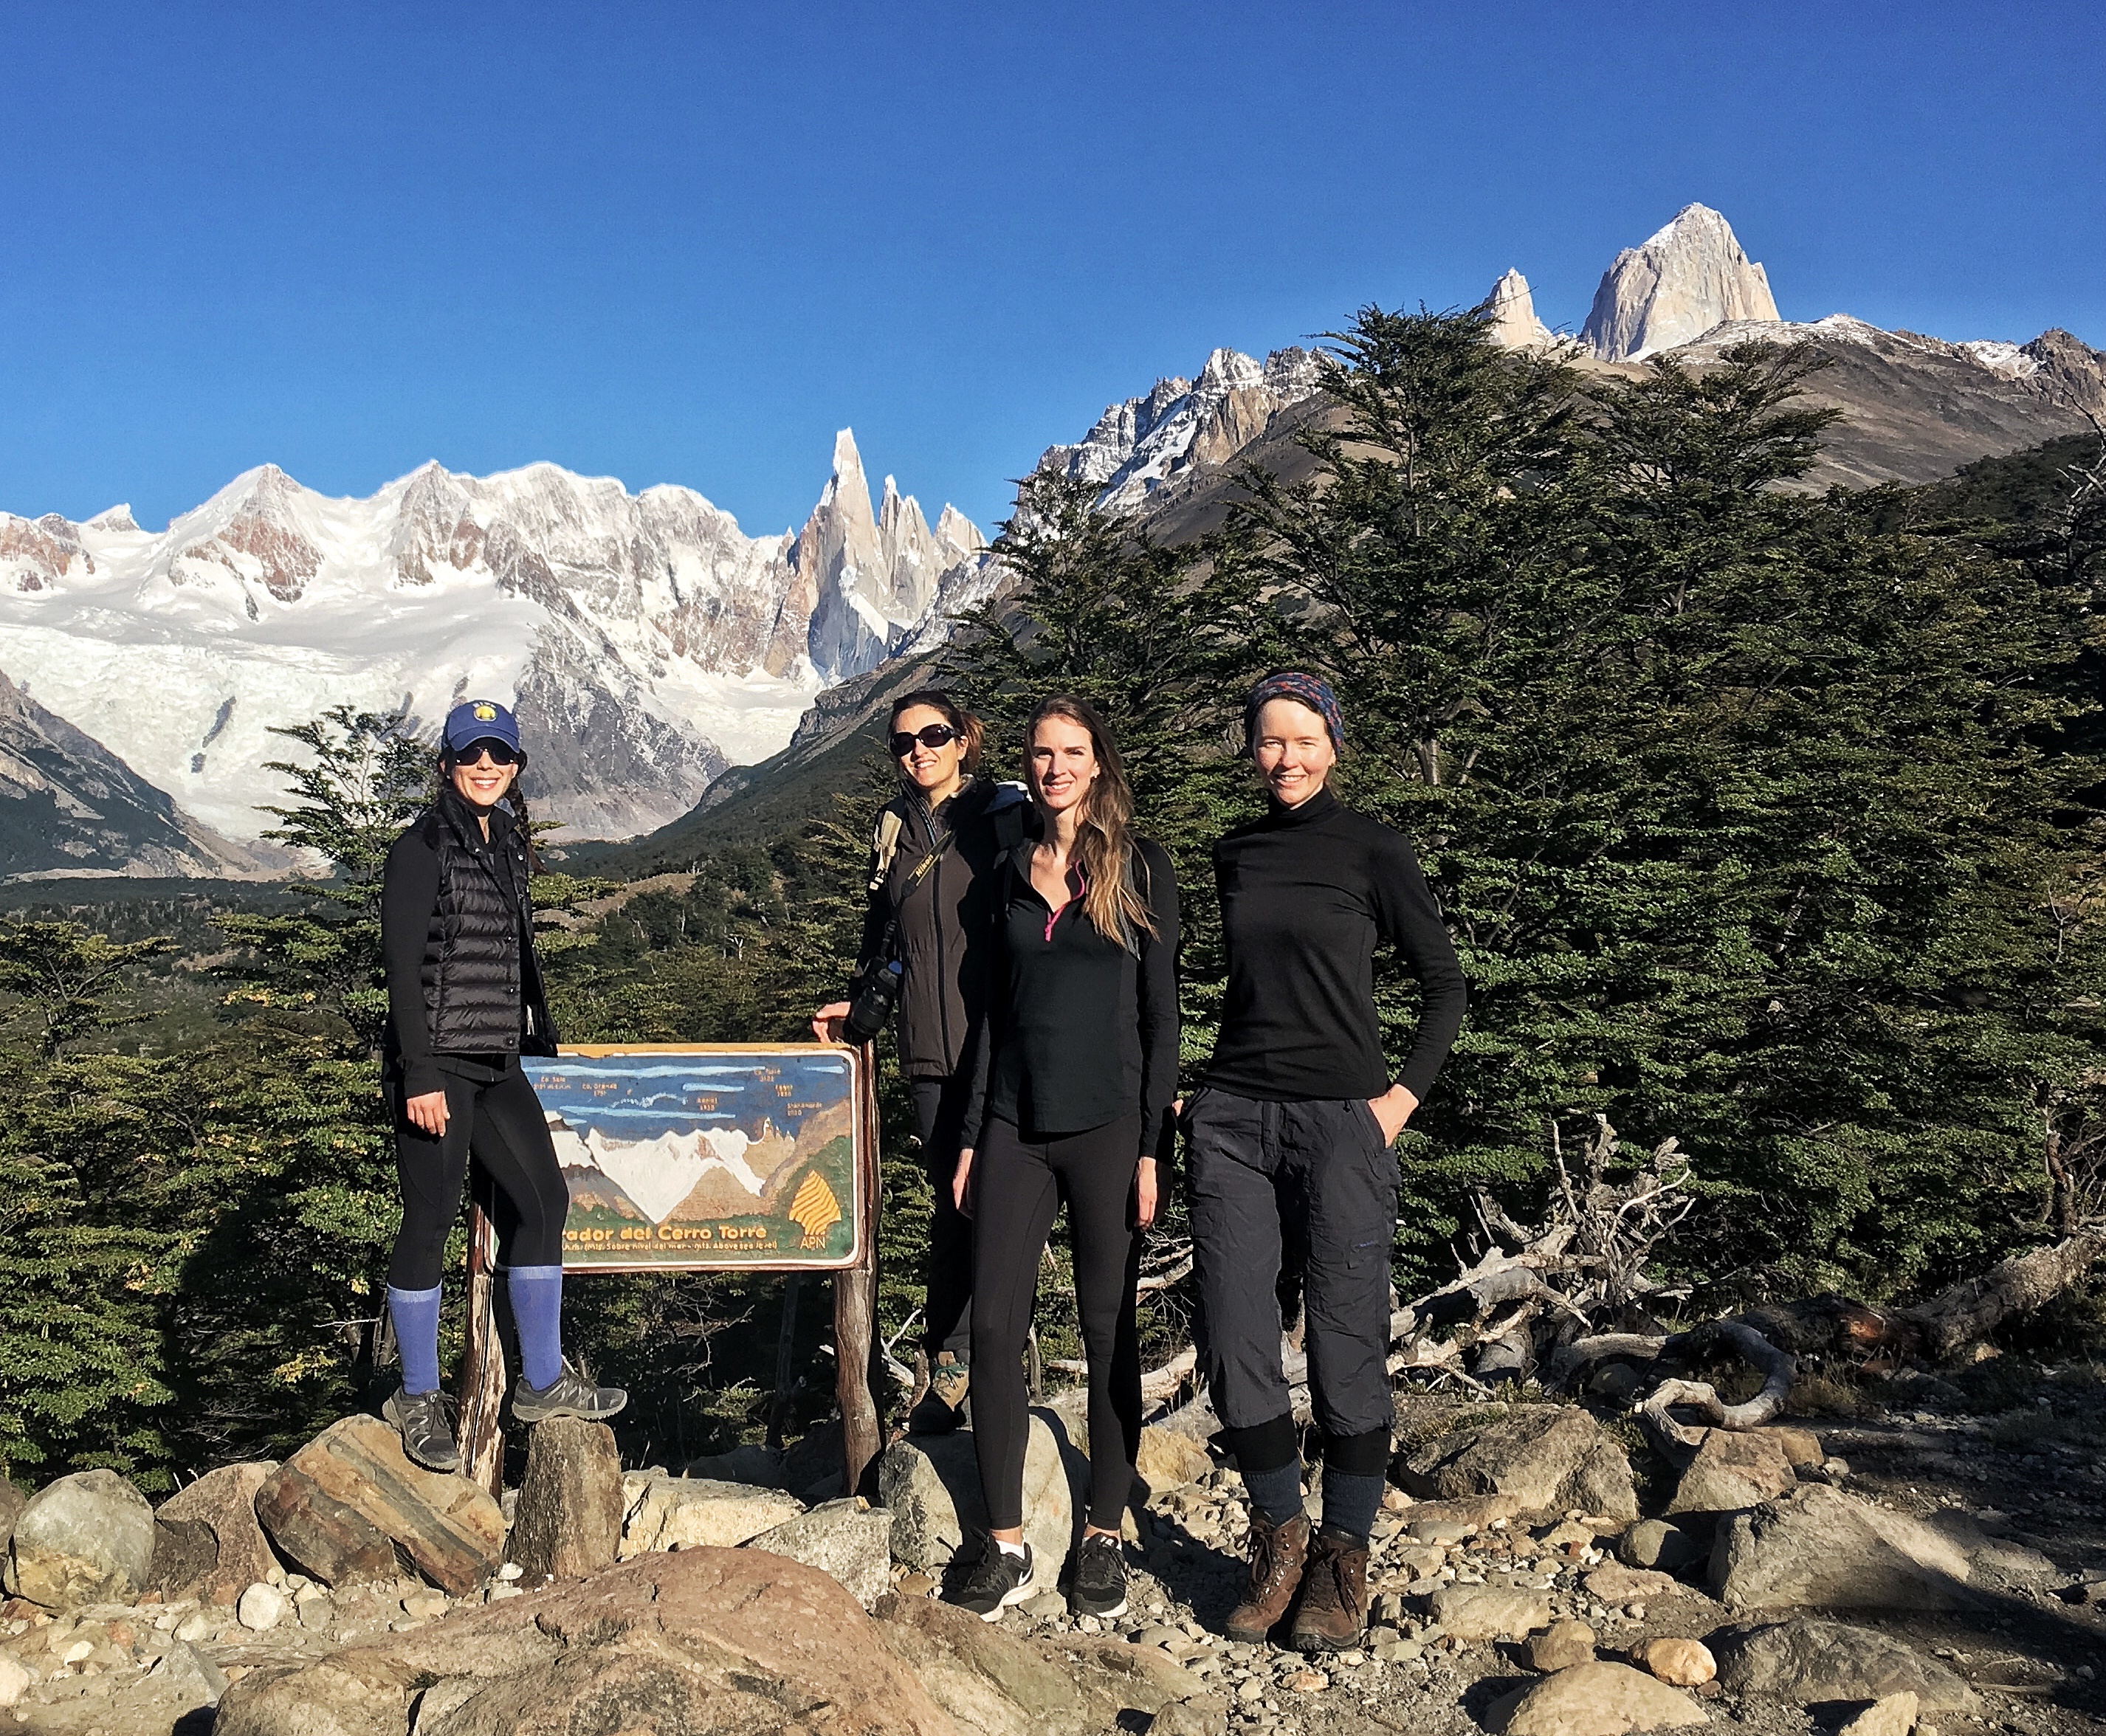 Four Flashpackers hike together in Argentina's Patagonia region